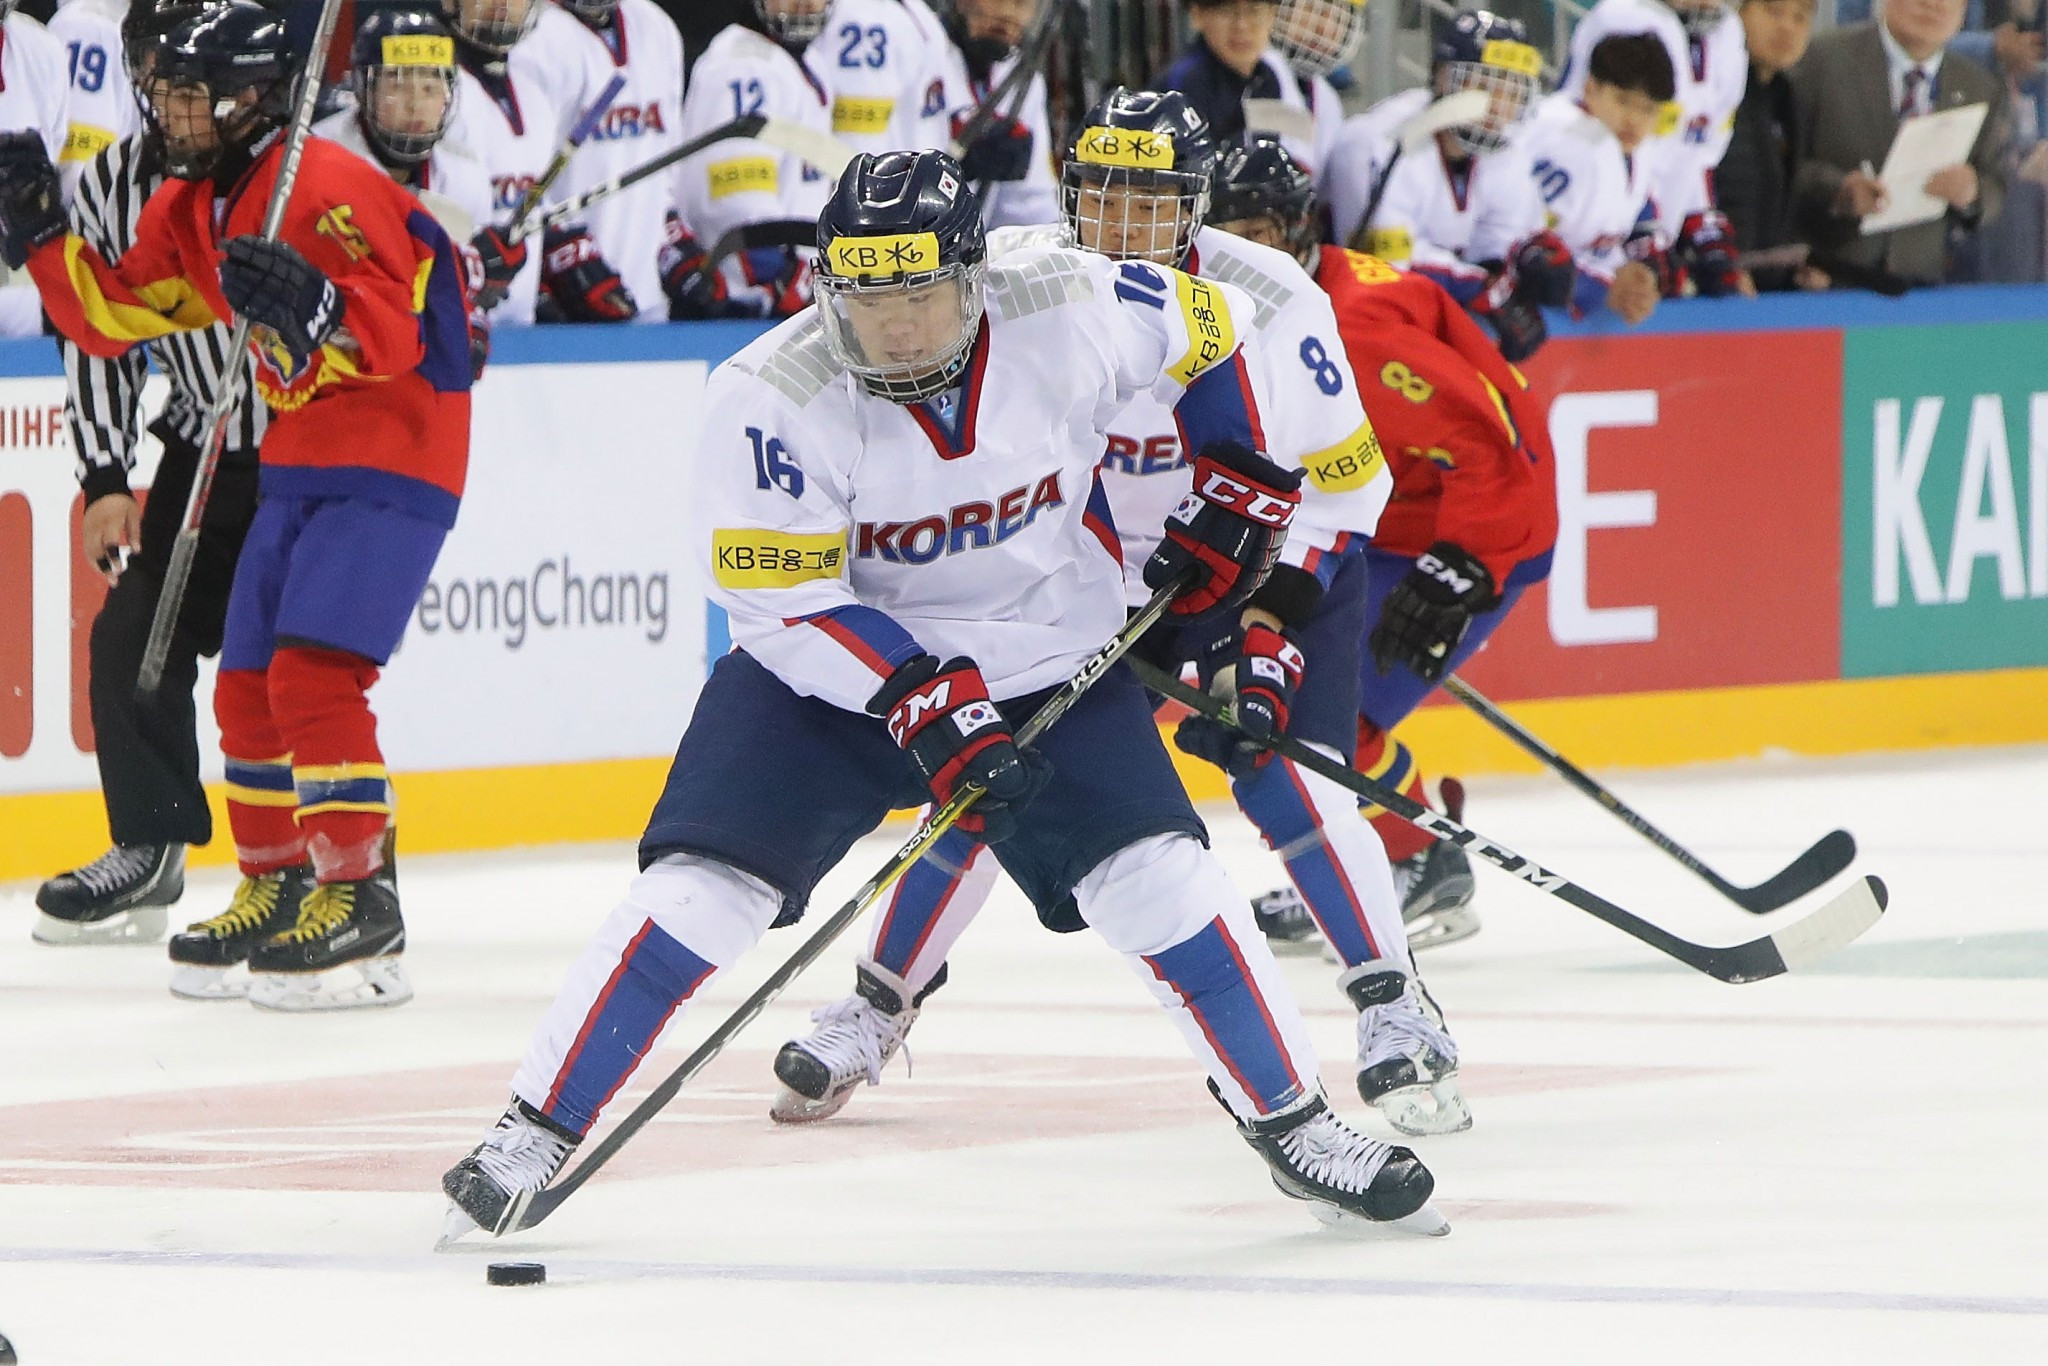 South Korea were encouraged by the IIHF to recruit overseas players ©Getty Images 